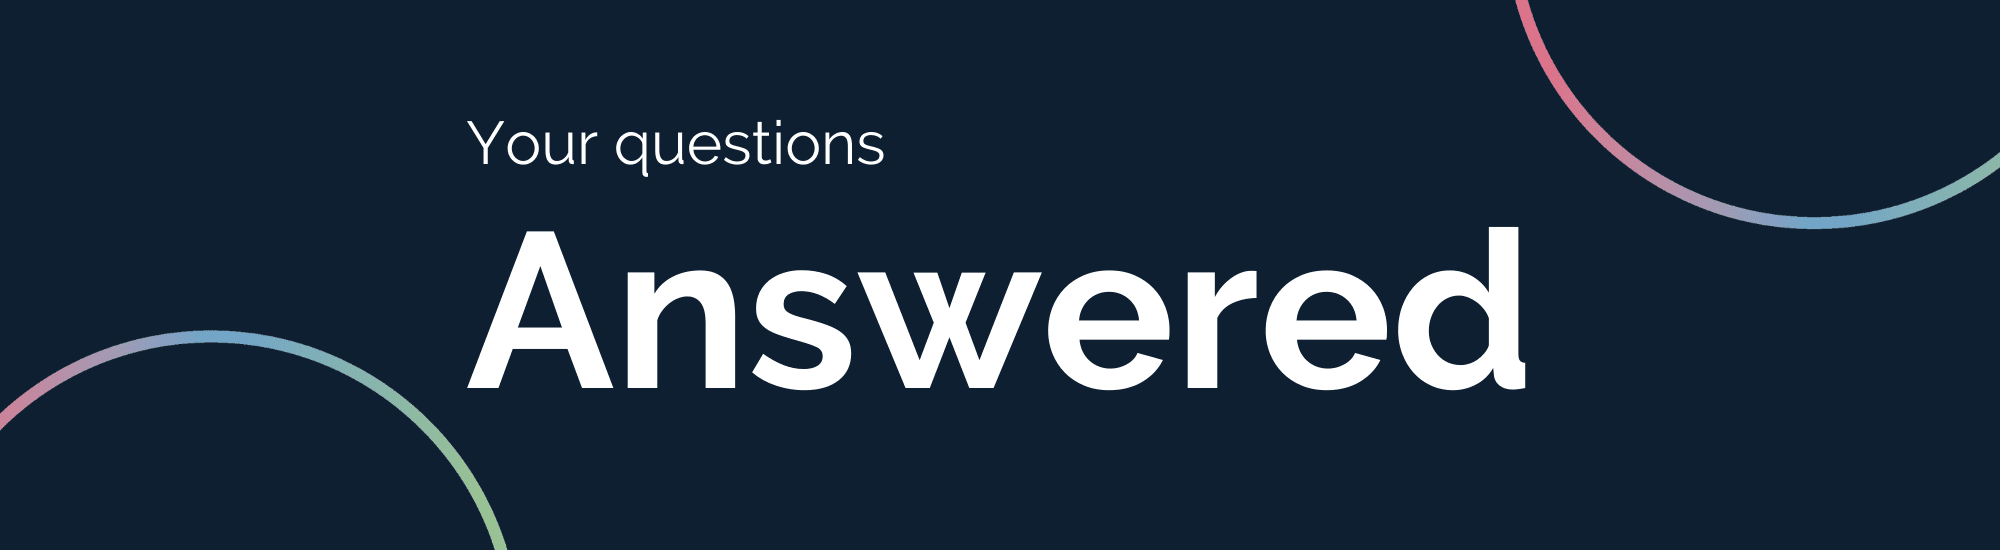 Your finance questions - answered by us